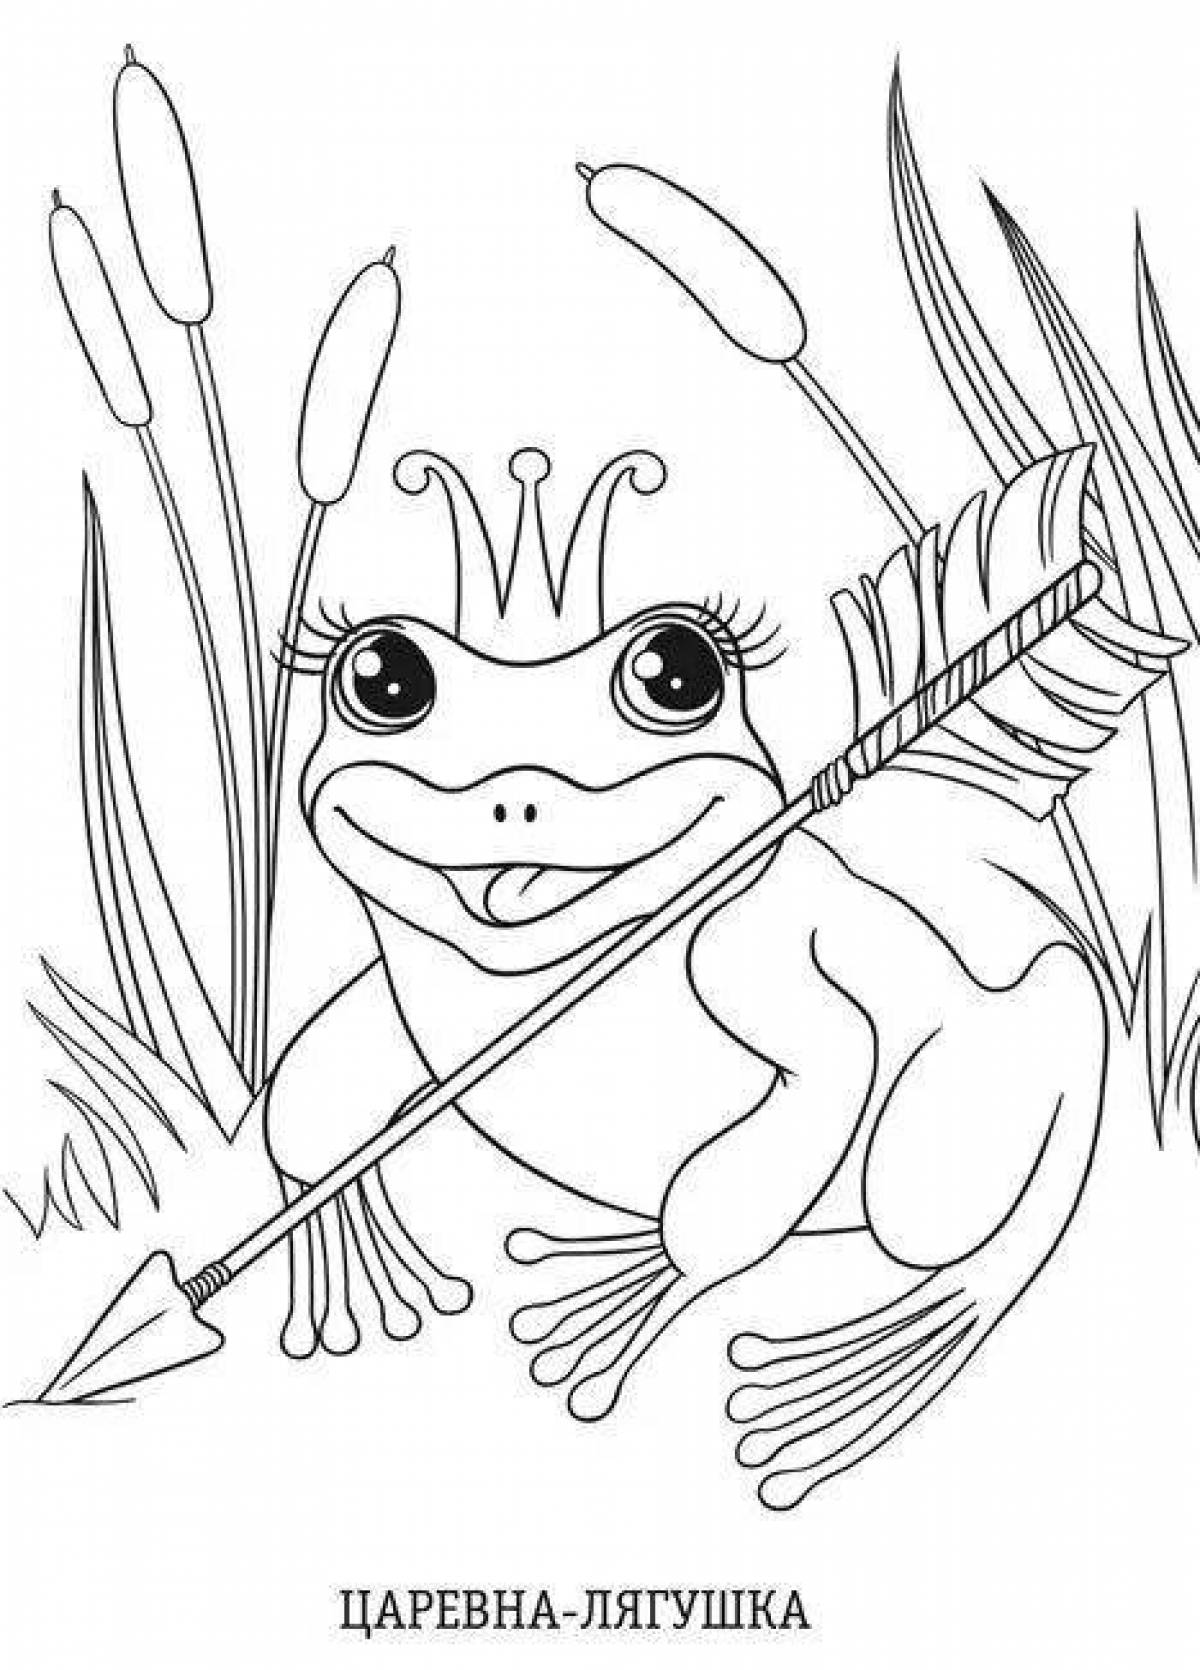 Wonderful Frog Princess Coloring Pages for Kids